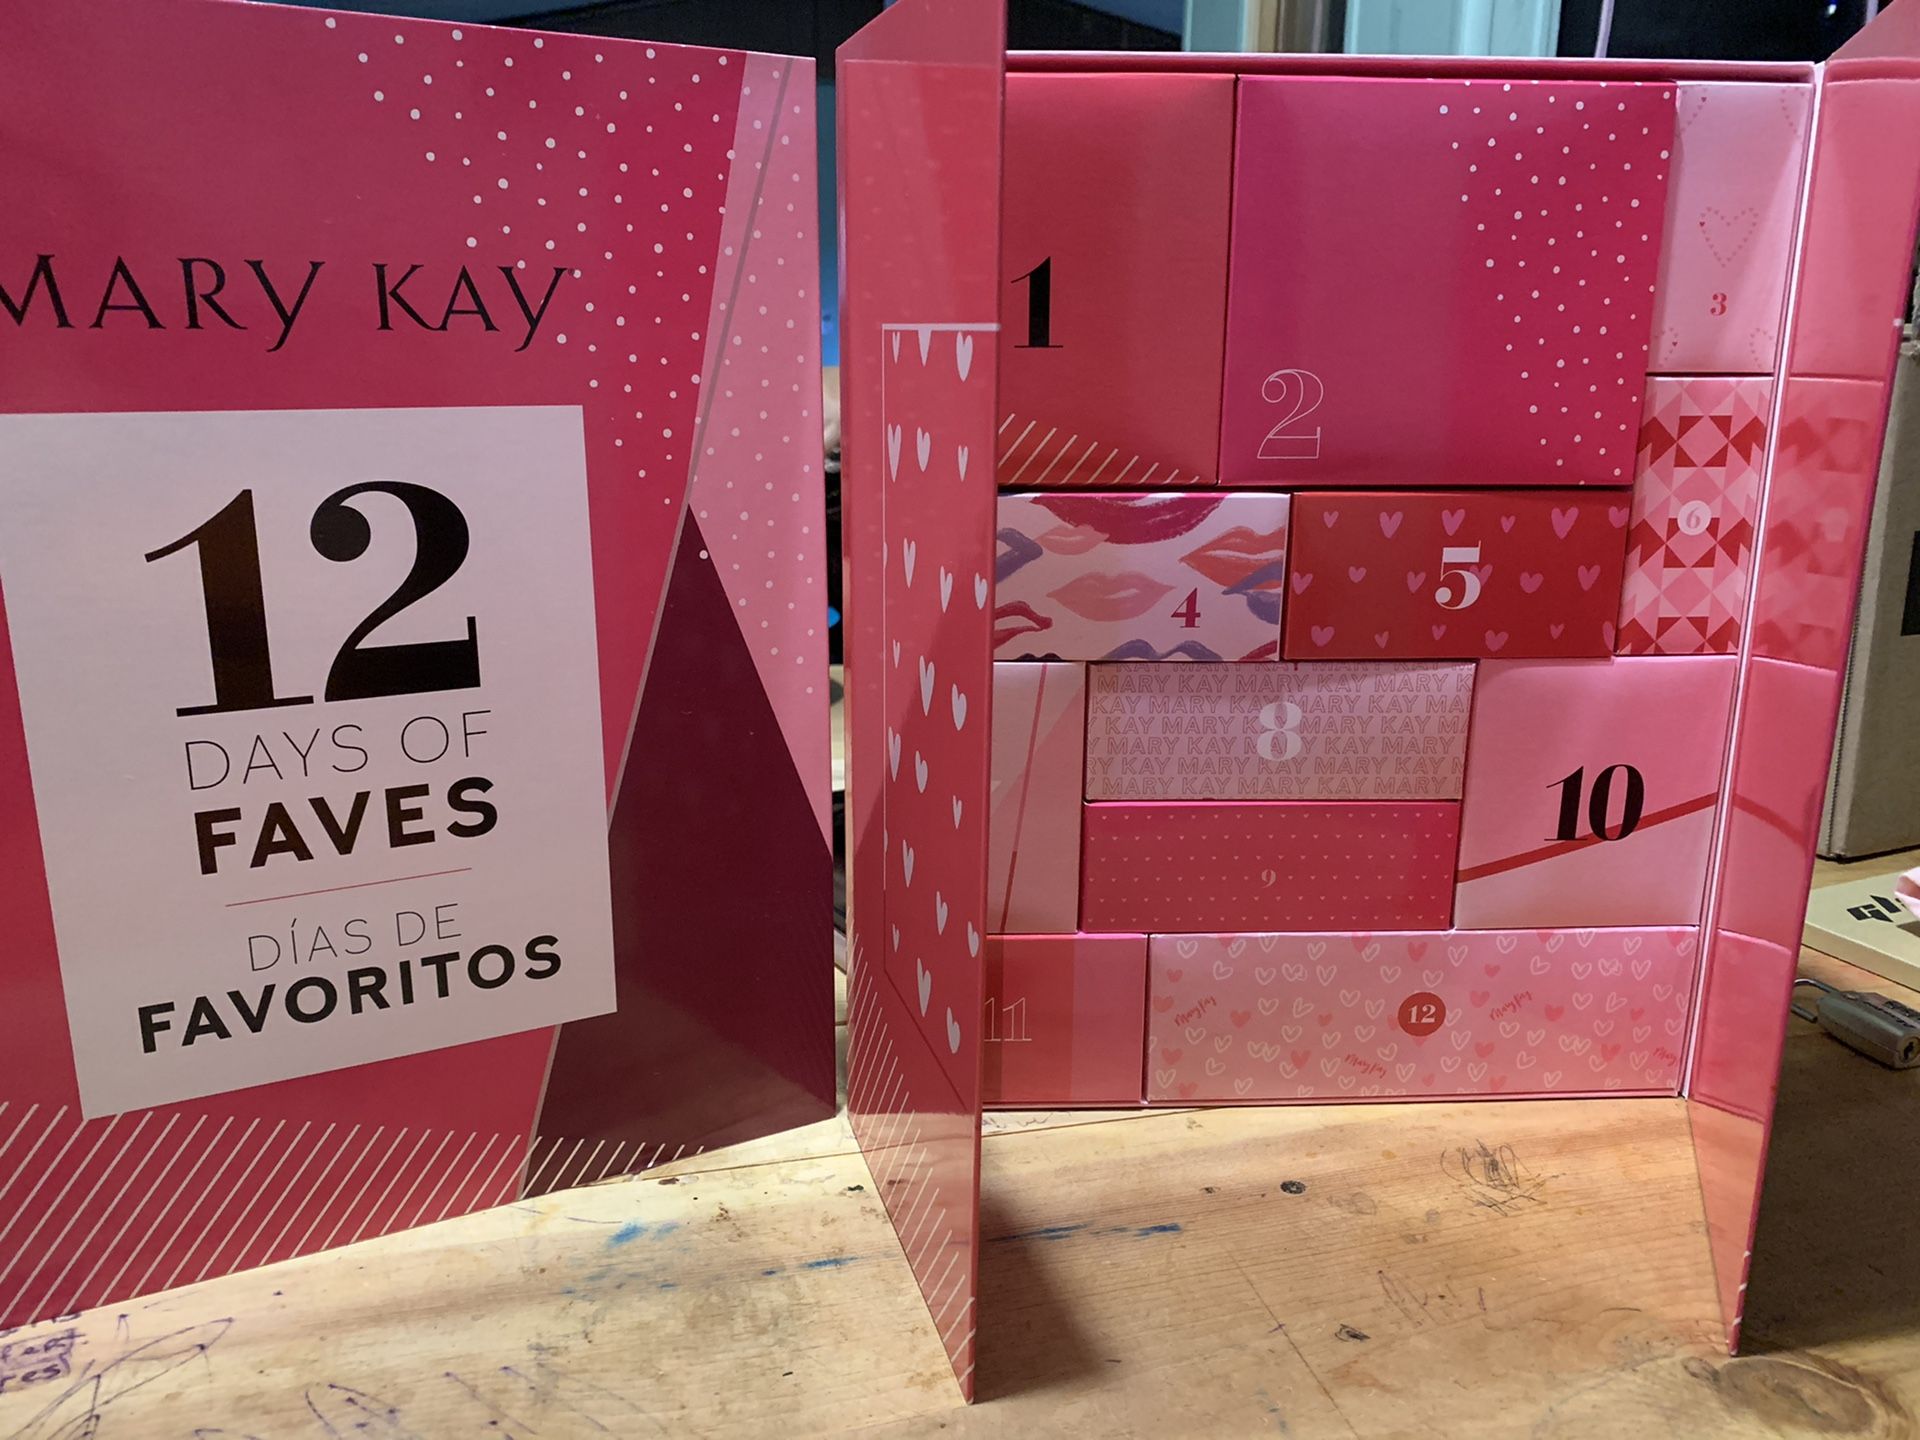 Mary Kay 12 days of faves